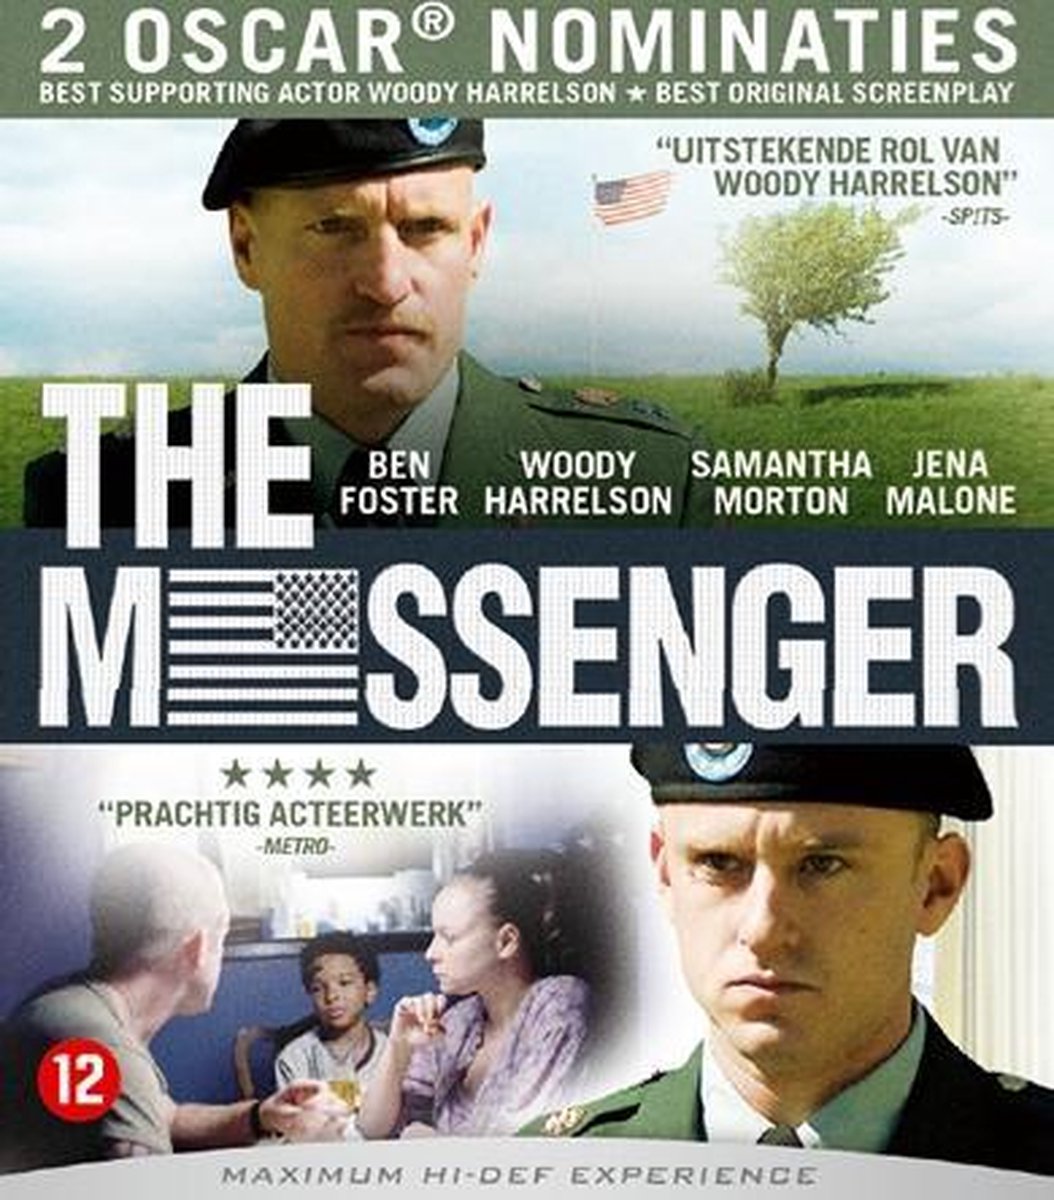 * USED * The messenger / Blu-ray